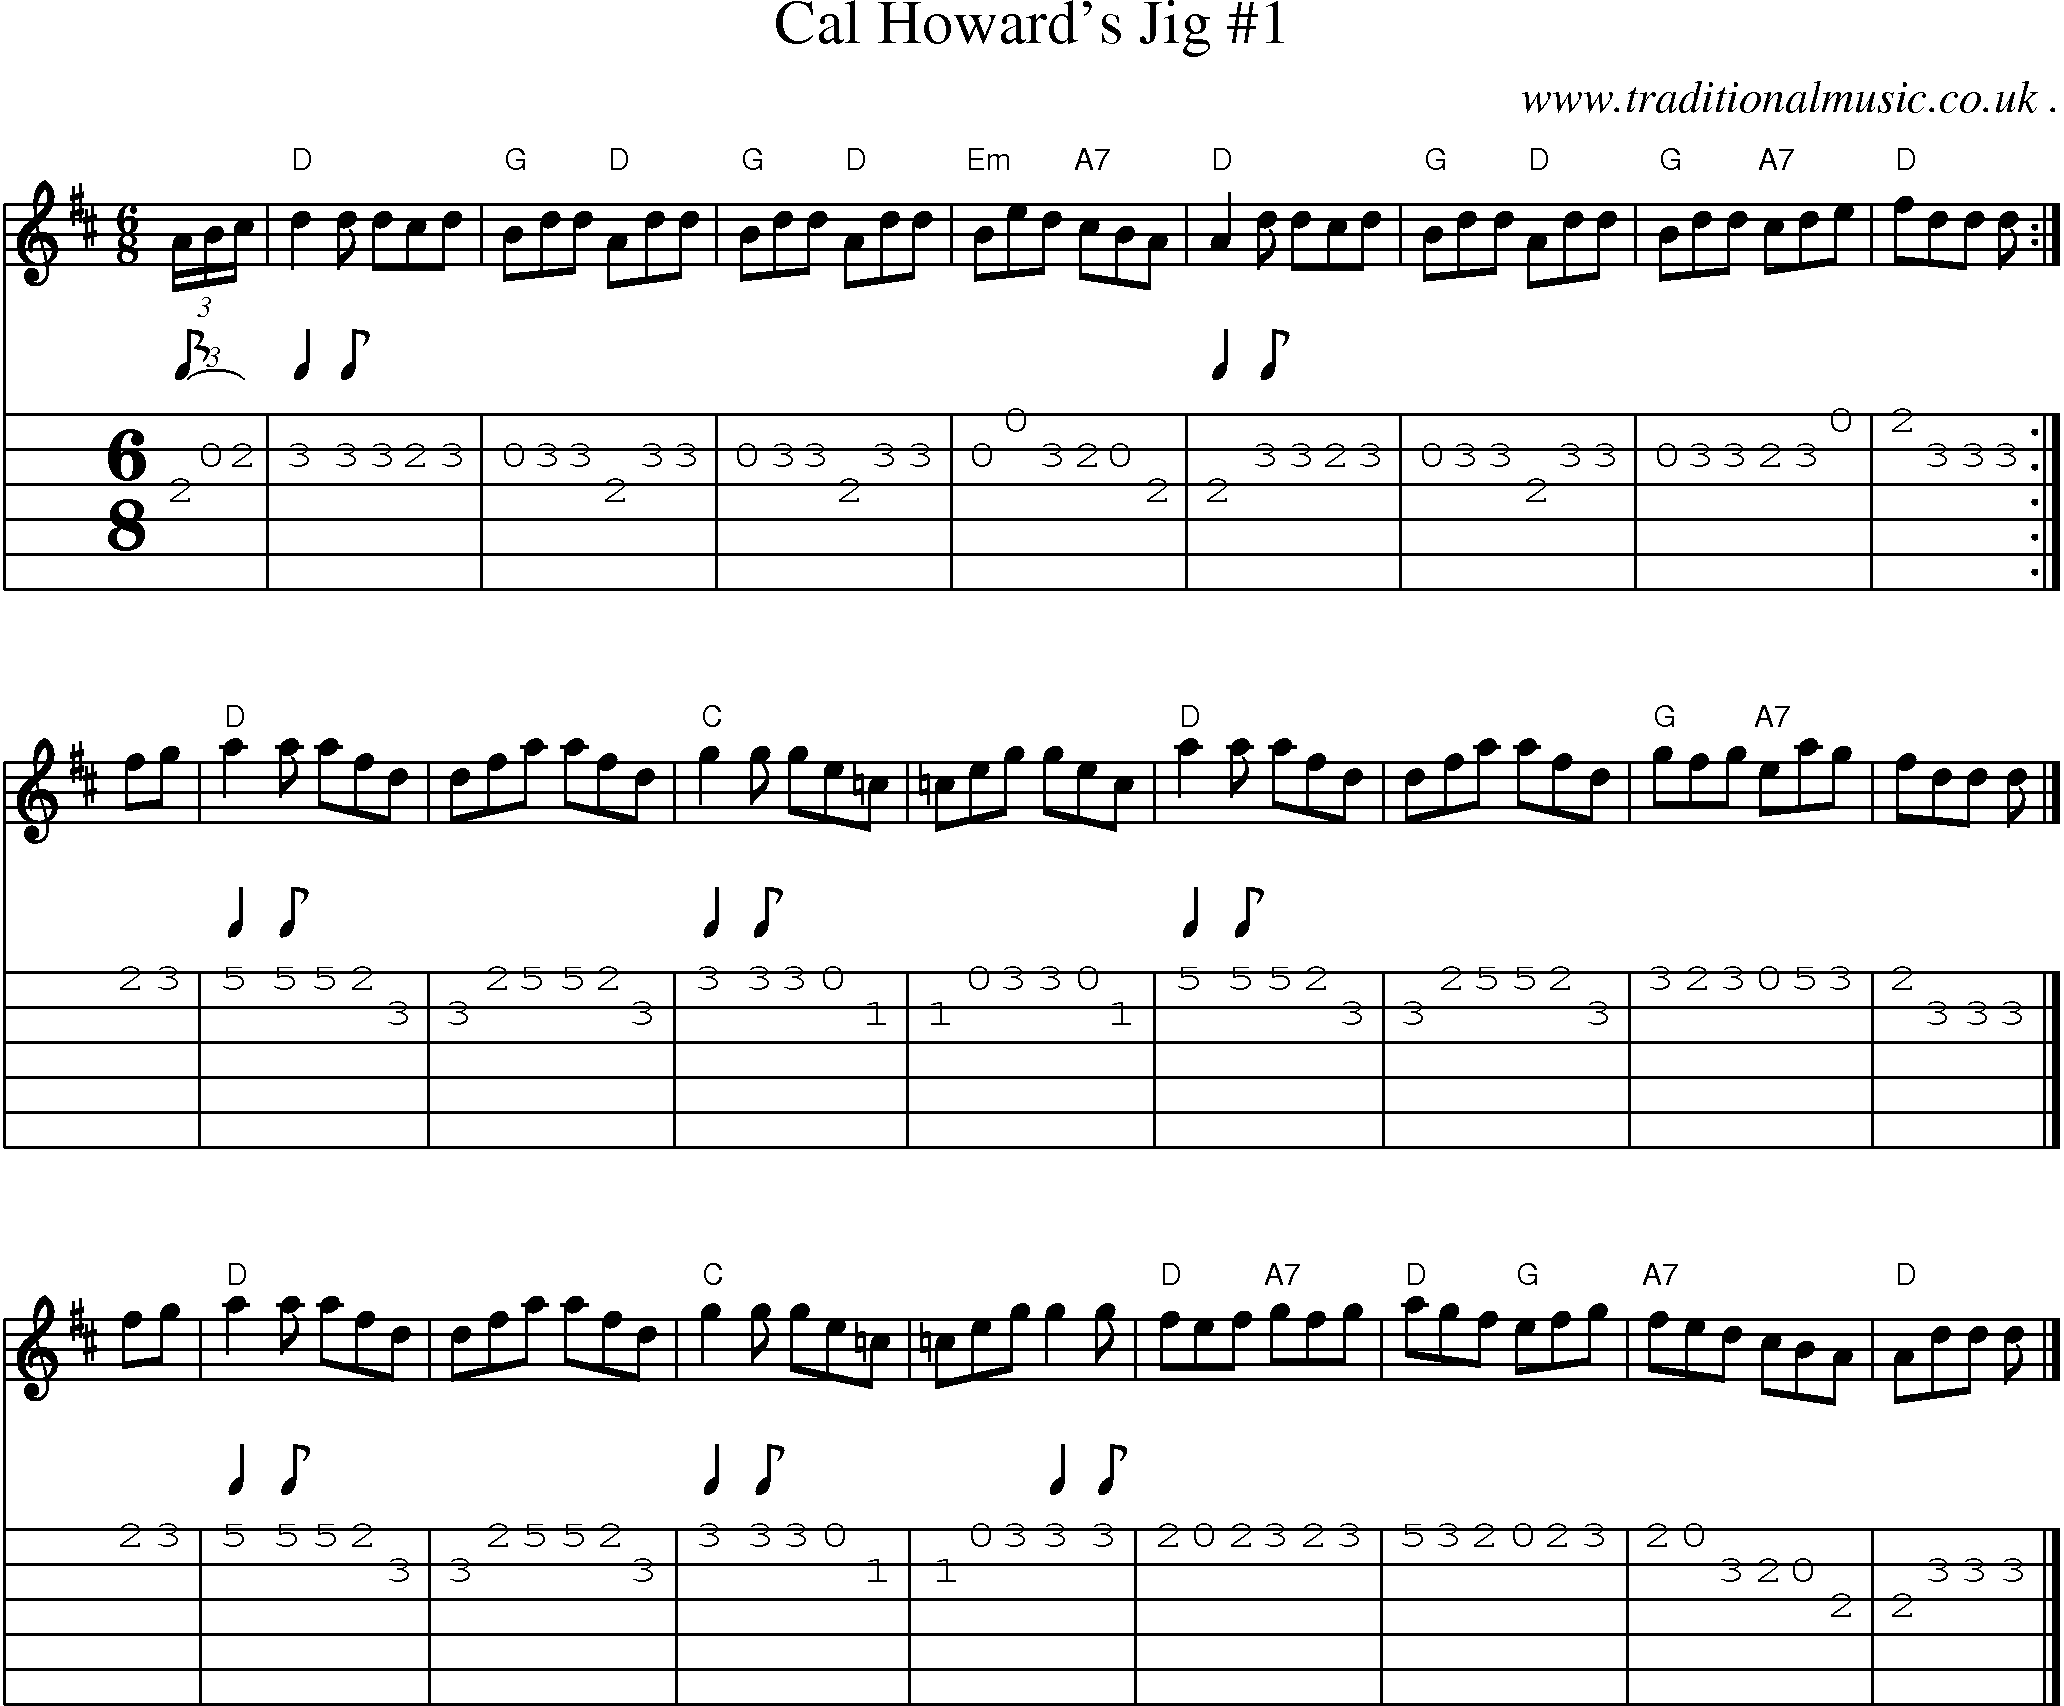 Sheet-music  score, Chords and Guitar Tabs for Cal Howards Jig 1